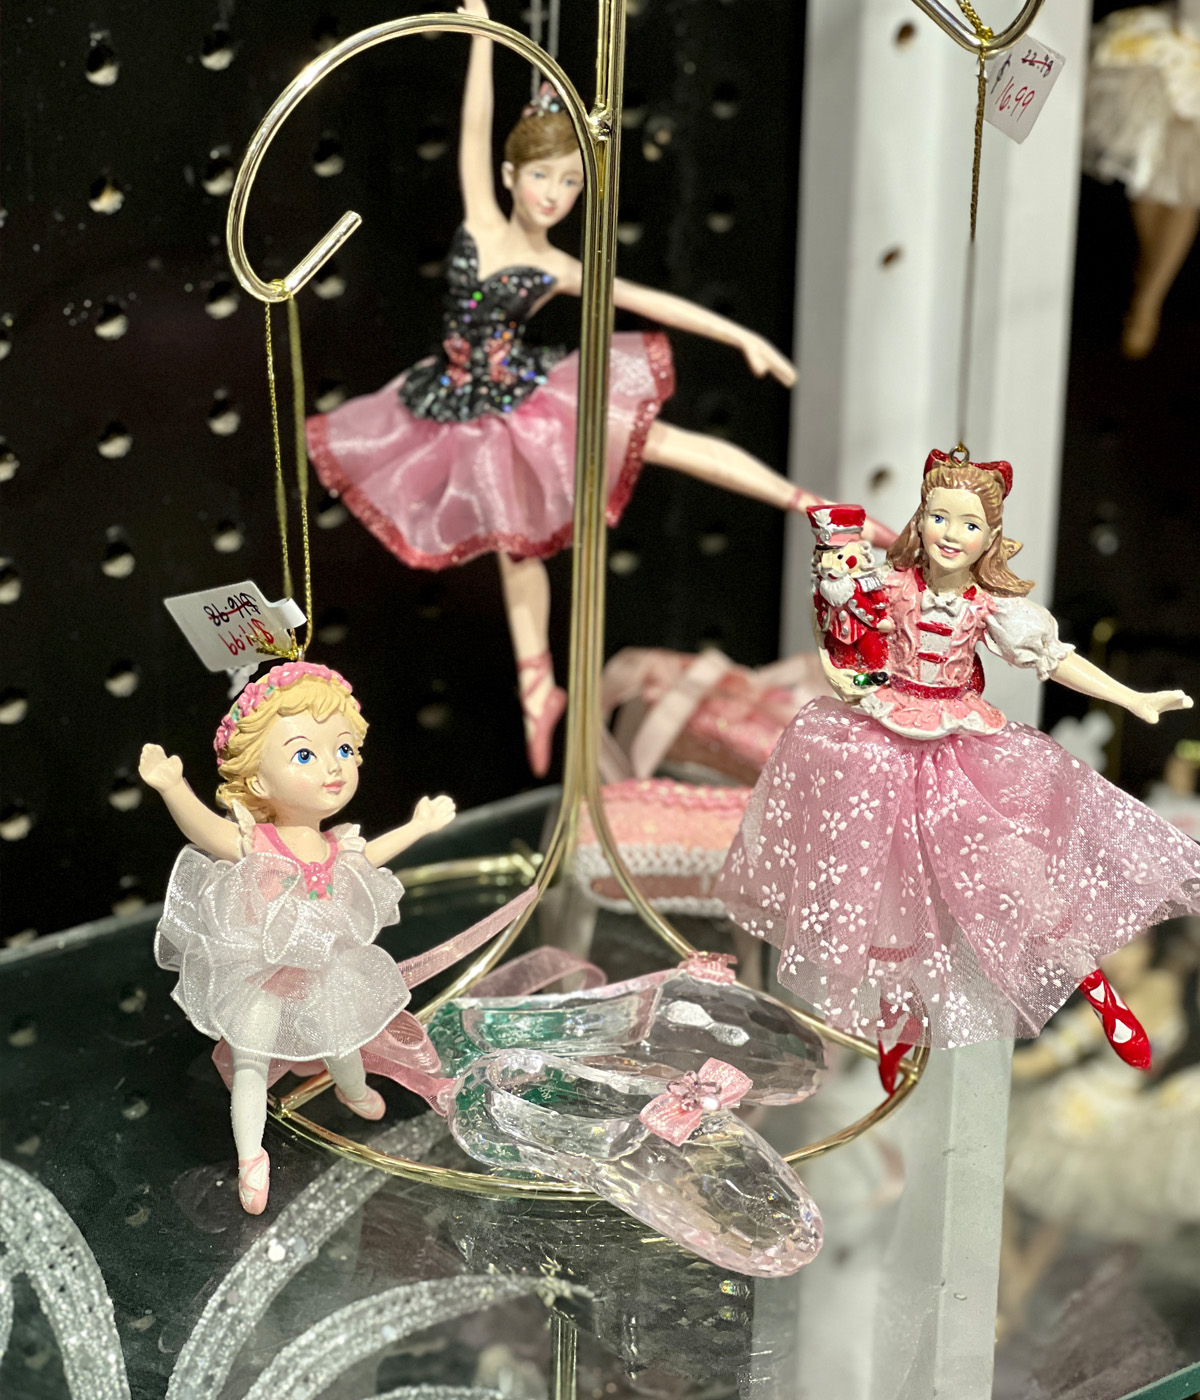 For the ballet lovers, we have a great assortment of ornaments to choose from